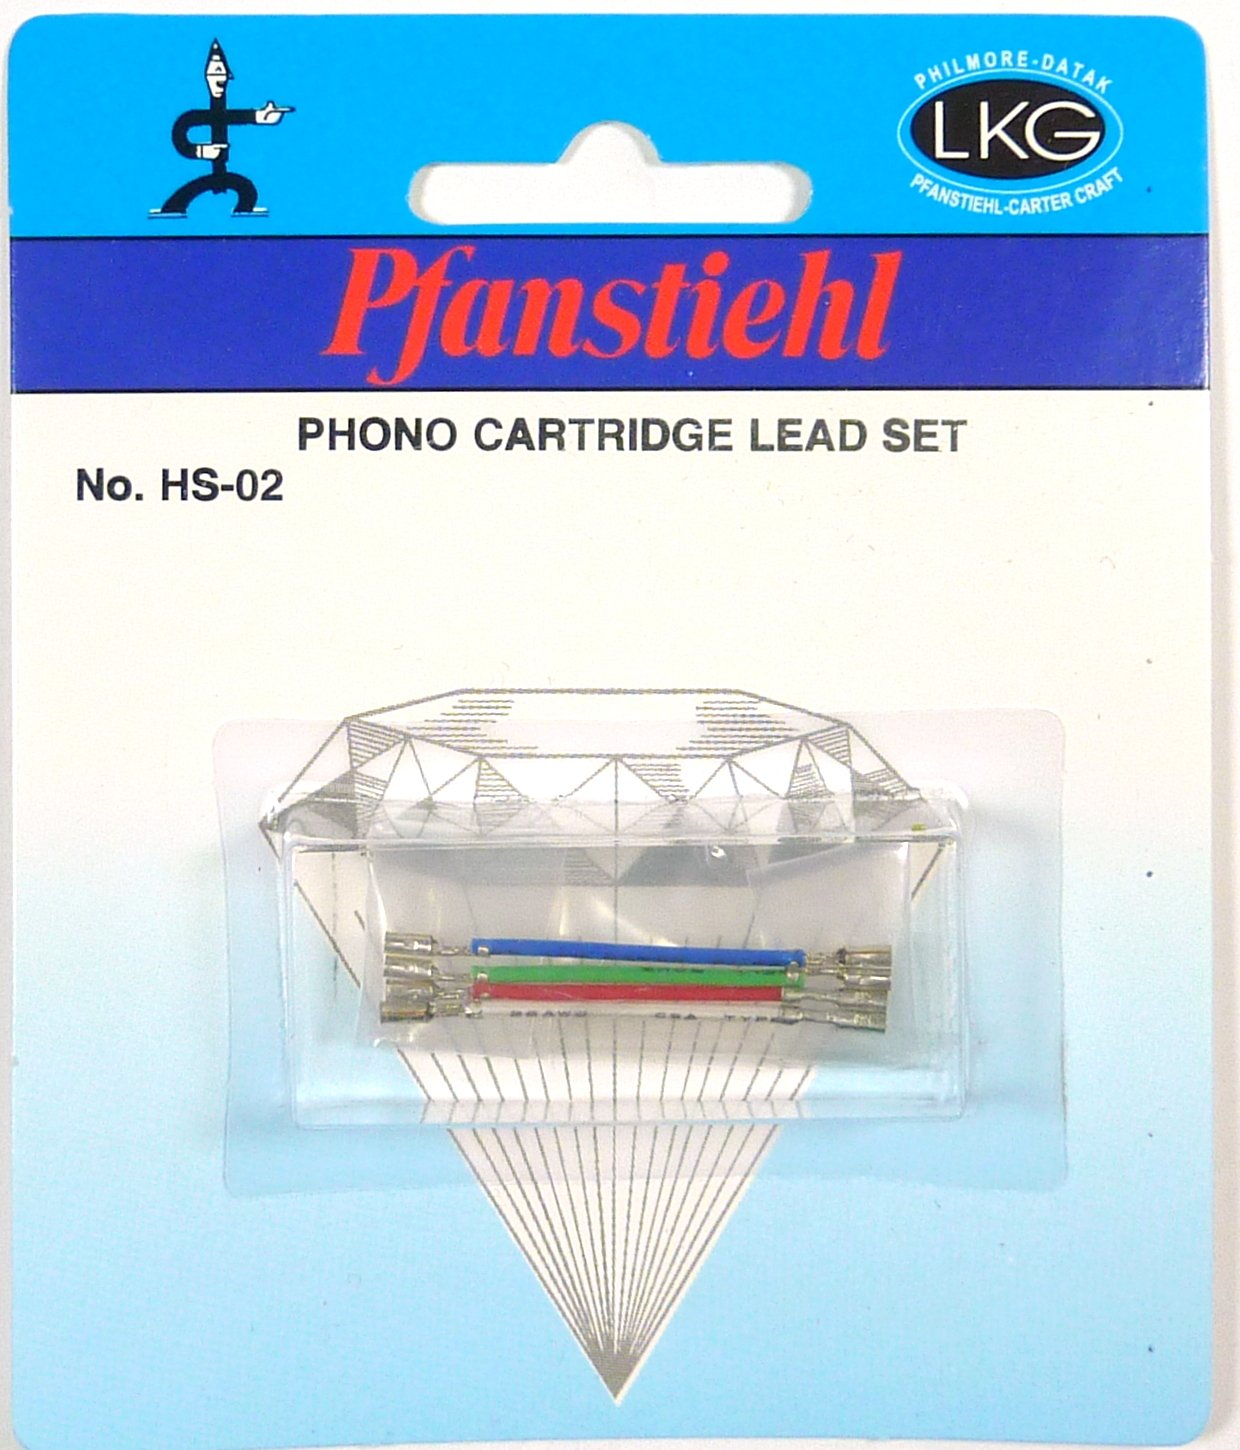 Pfanstiehl Turntable Phonograph Lead Wires Stereo Cartridge Headshell Wires